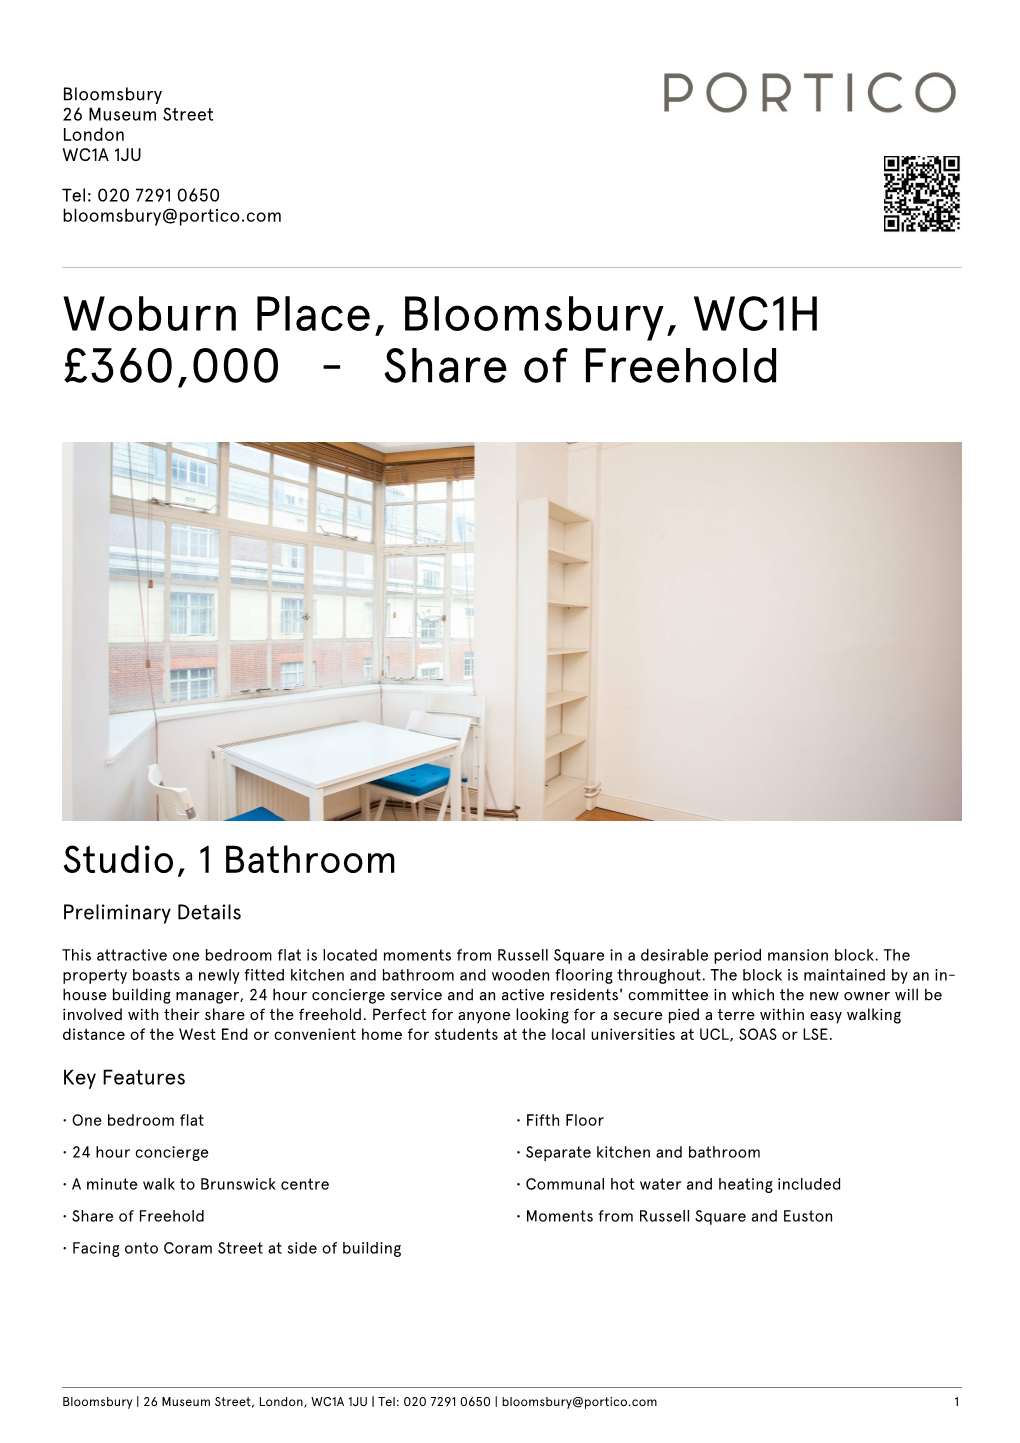 Woburn Place, Bloomsbury, WC1H £360000